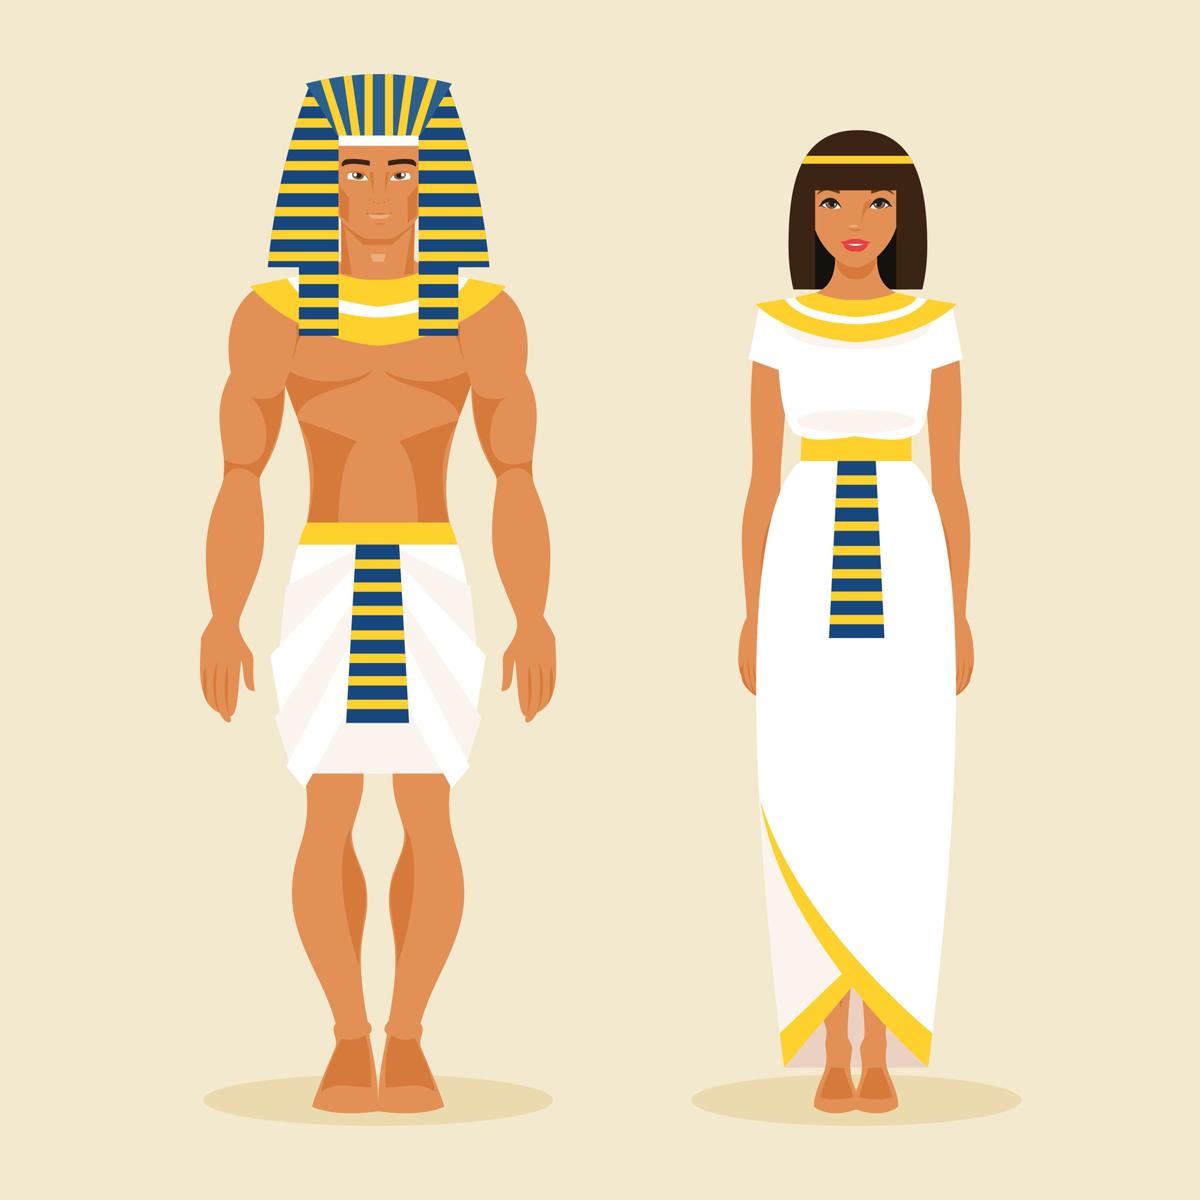 18 Captivating And Easy To Remember Ancient Egypt Facts